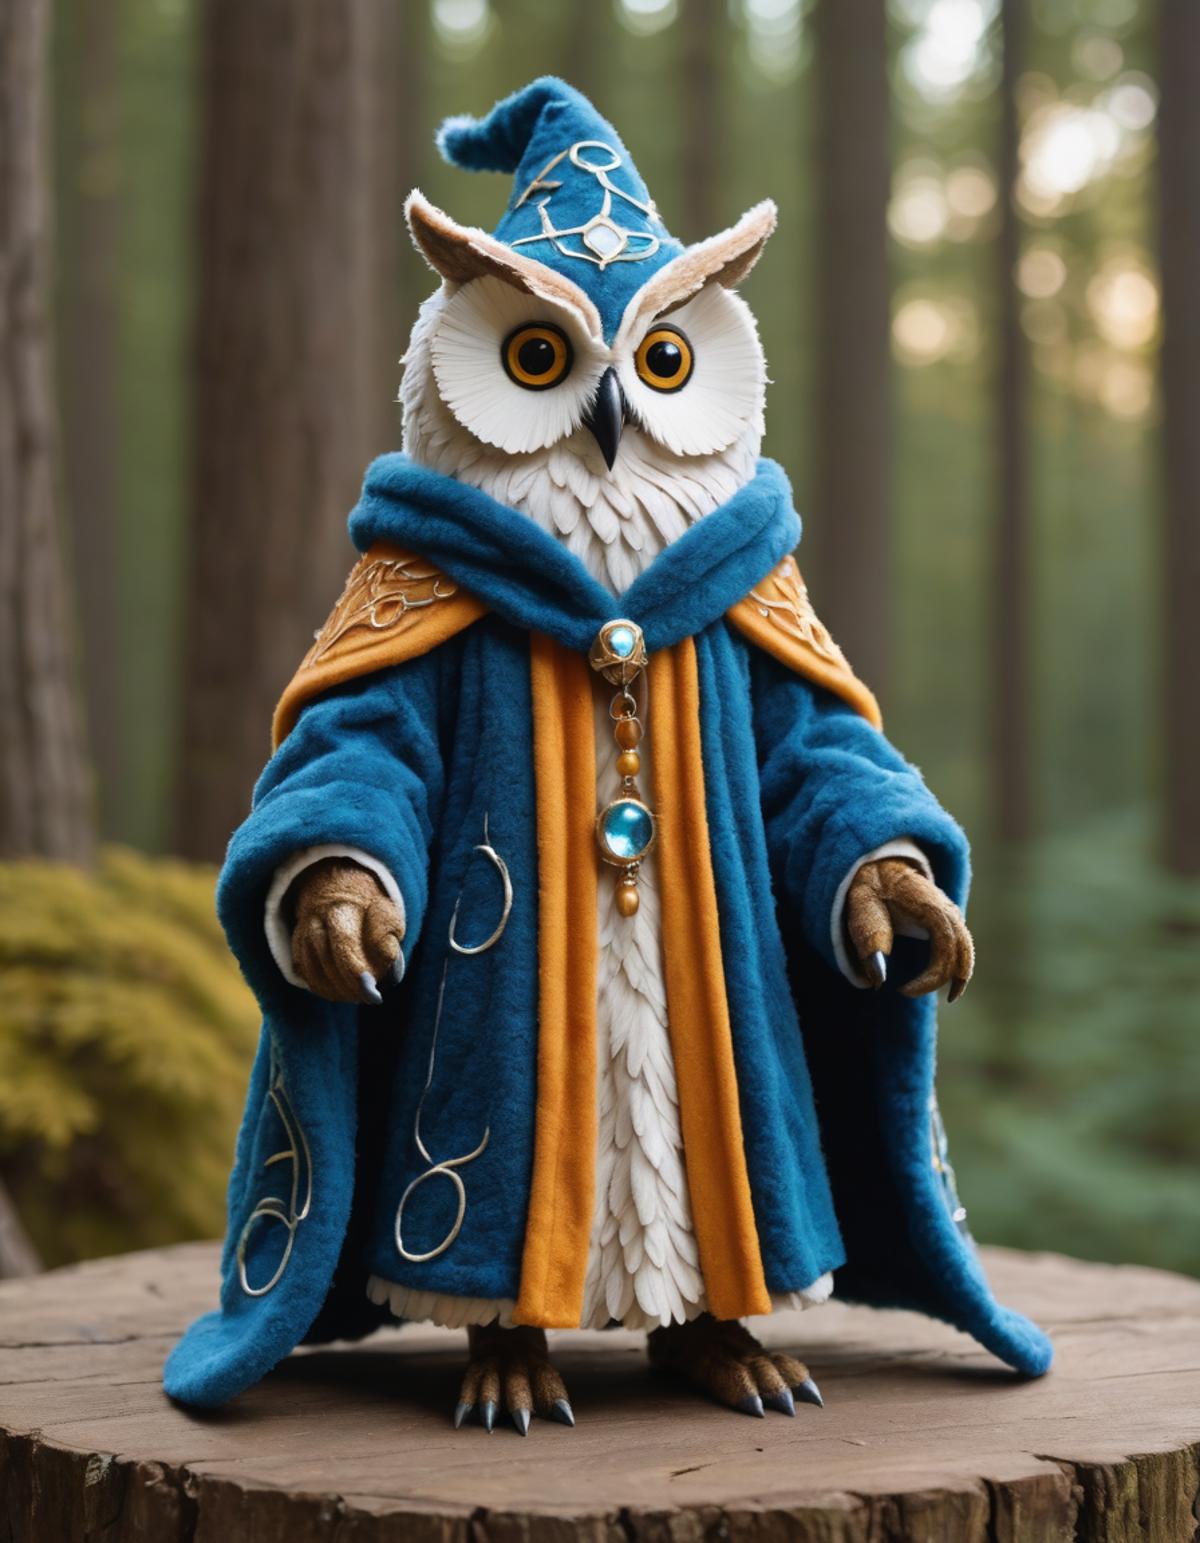 A small owl figurine wearing a blue robe and yellow trimmed hat.